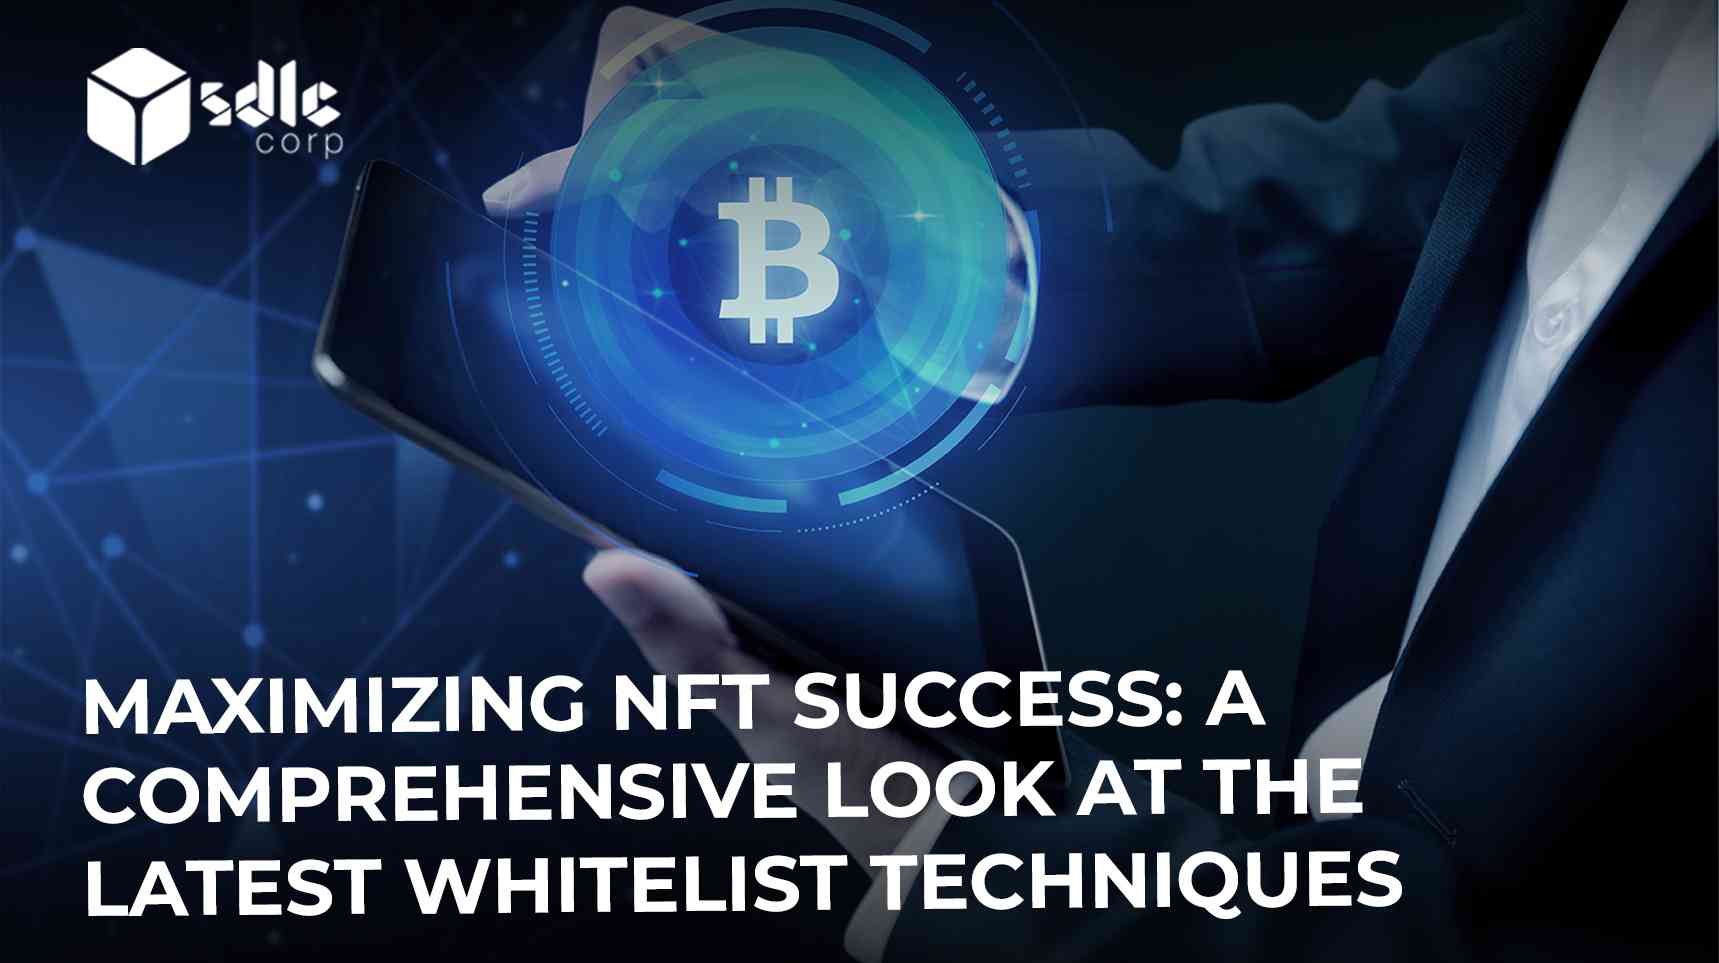 Maximizing NFT Success: A Comprehensive Look at the Latest Whitelist Techniques and Attracting High-Value Buyer Personas